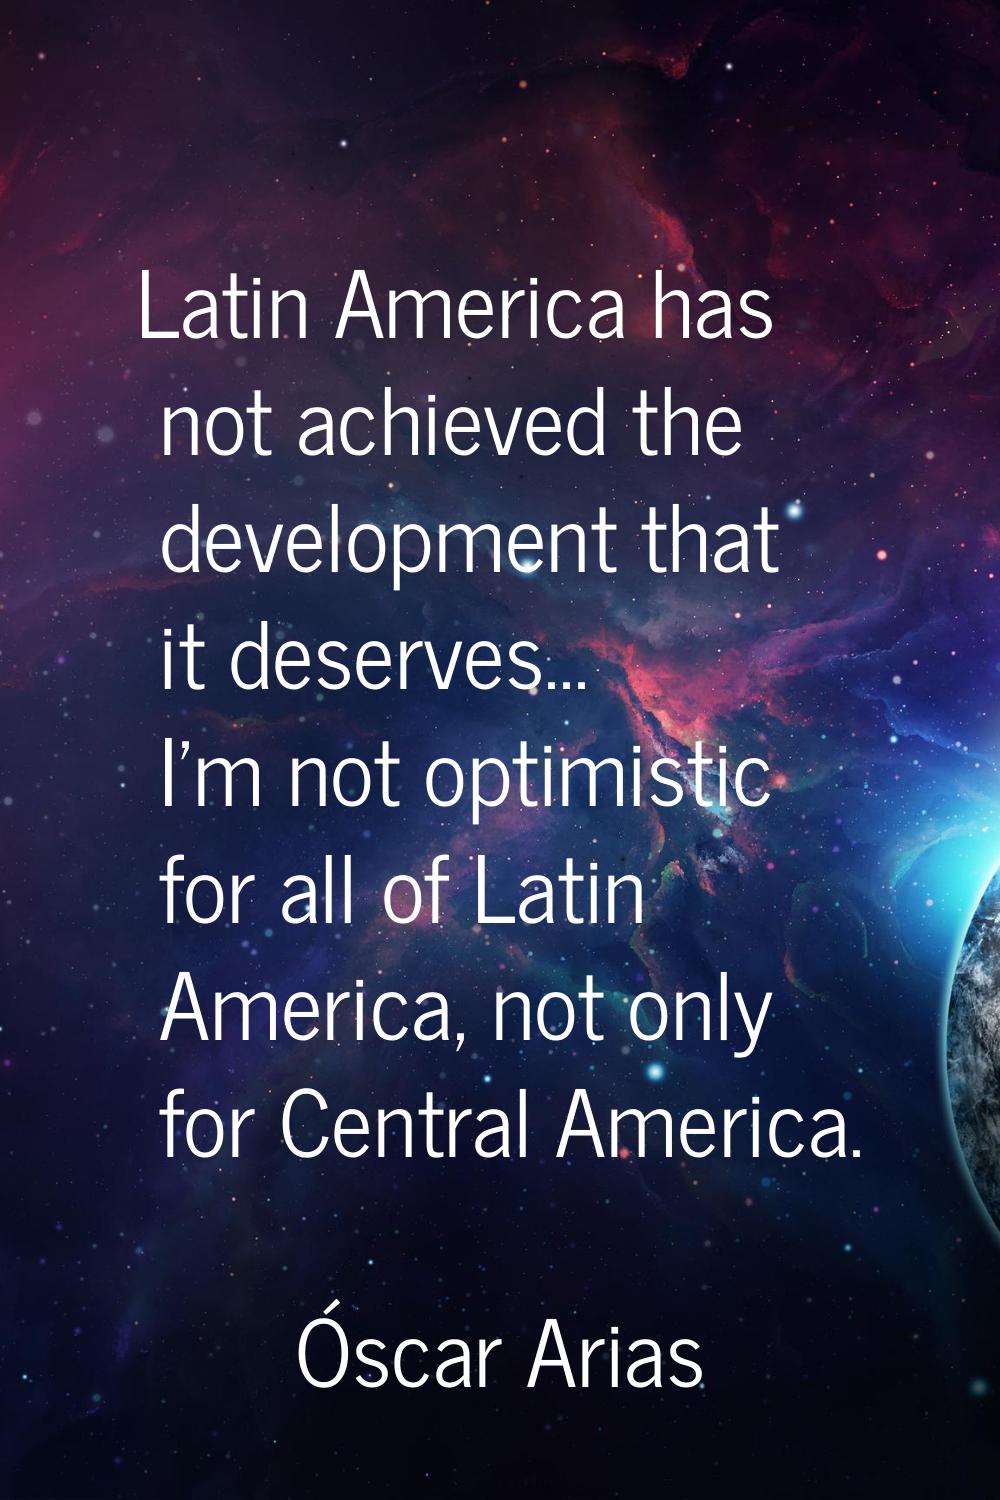 Latin America has not achieved the development that it deserves... I'm not optimistic for all of La